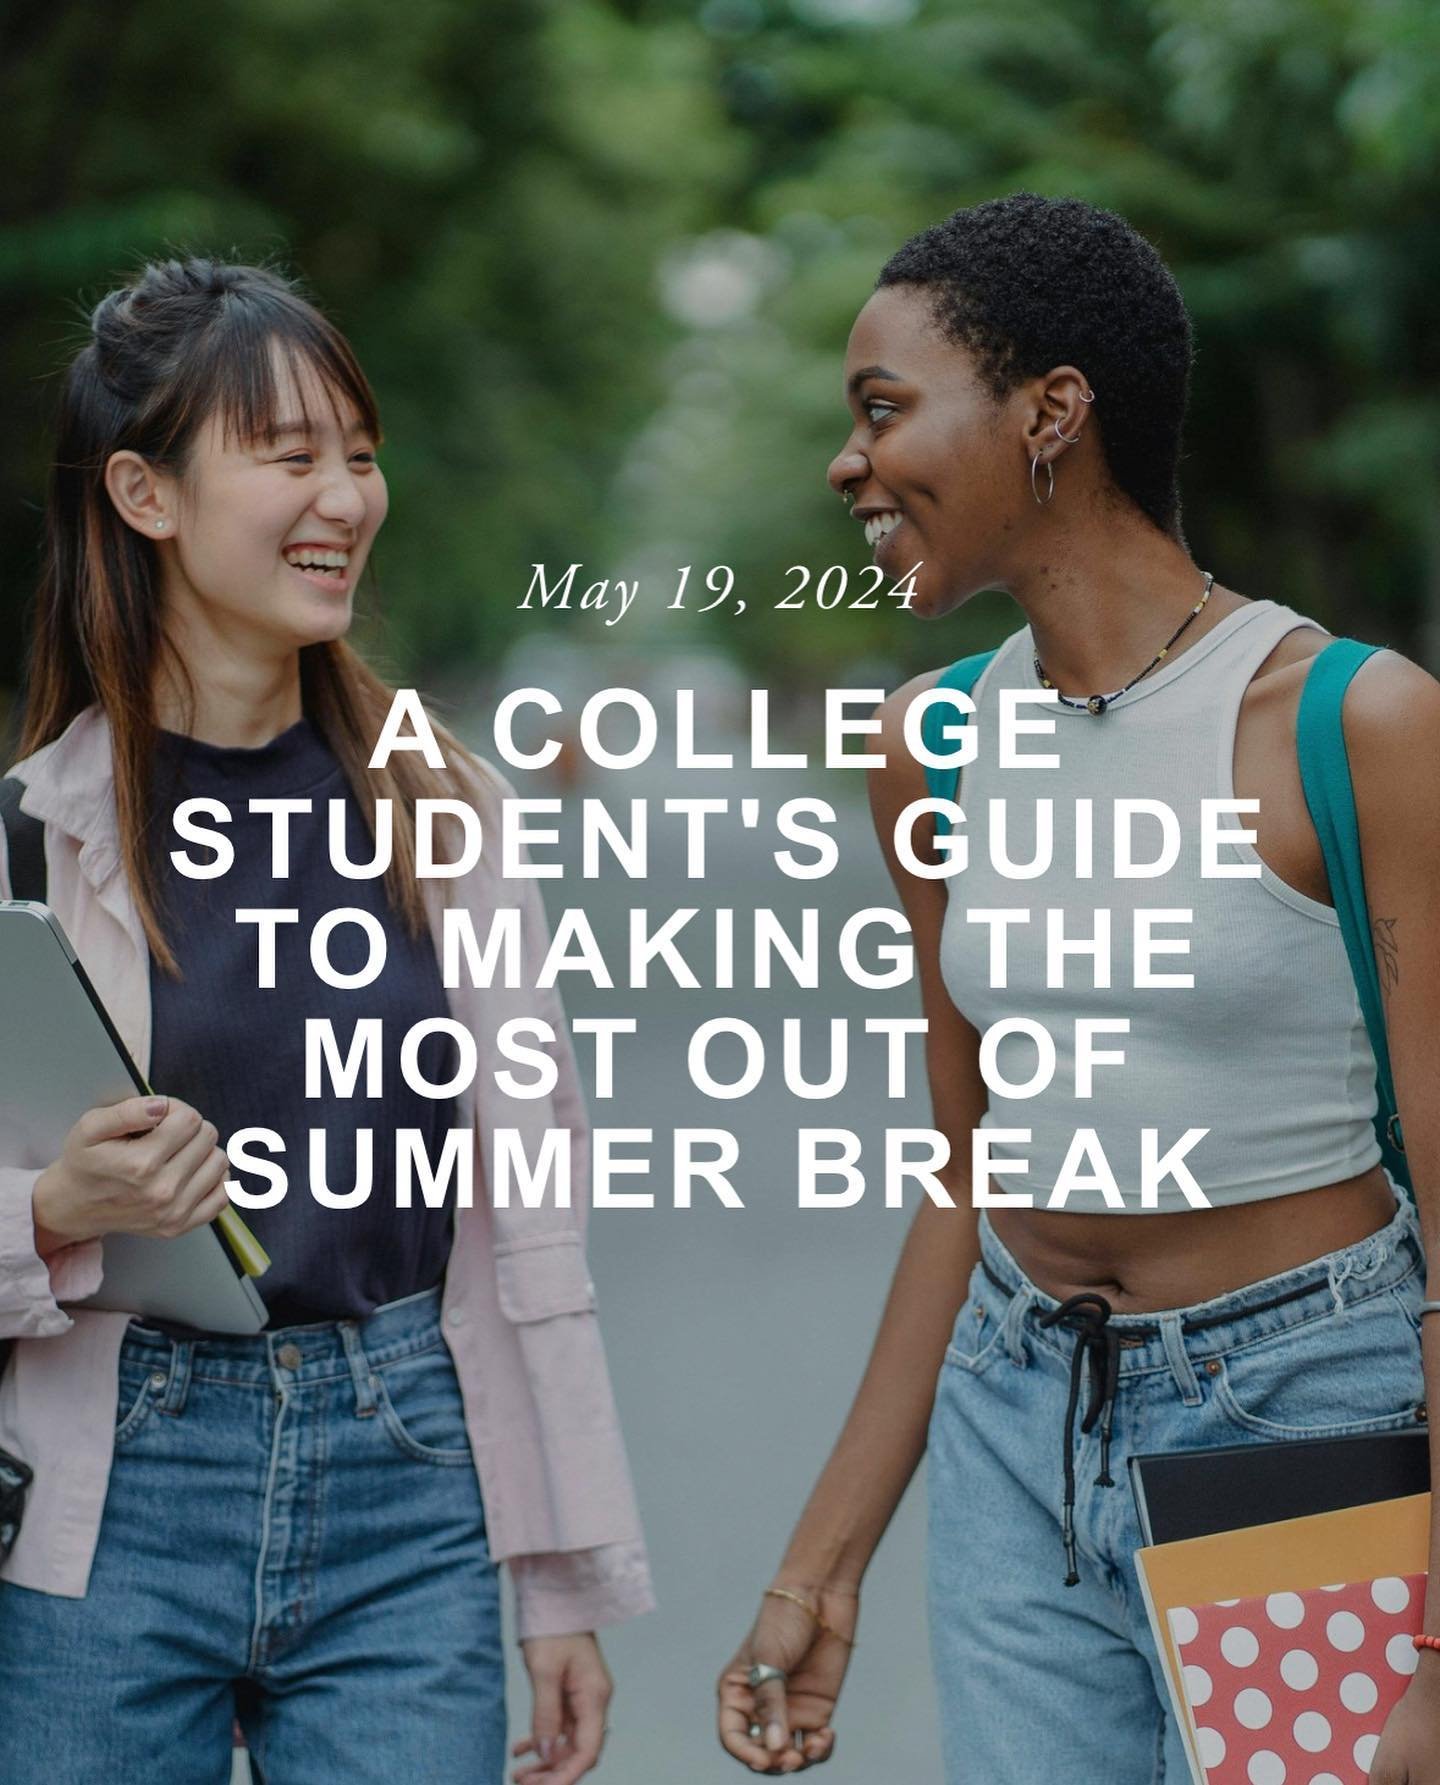 Check out this blog by our psychotherapist Rebecca Bischoff, LCSW if you&rsquo;re a college student getting ready for summer break!

&ldquo;Summer break time! Finally the semester has come to a close and you can breathe after the immense amount of wo